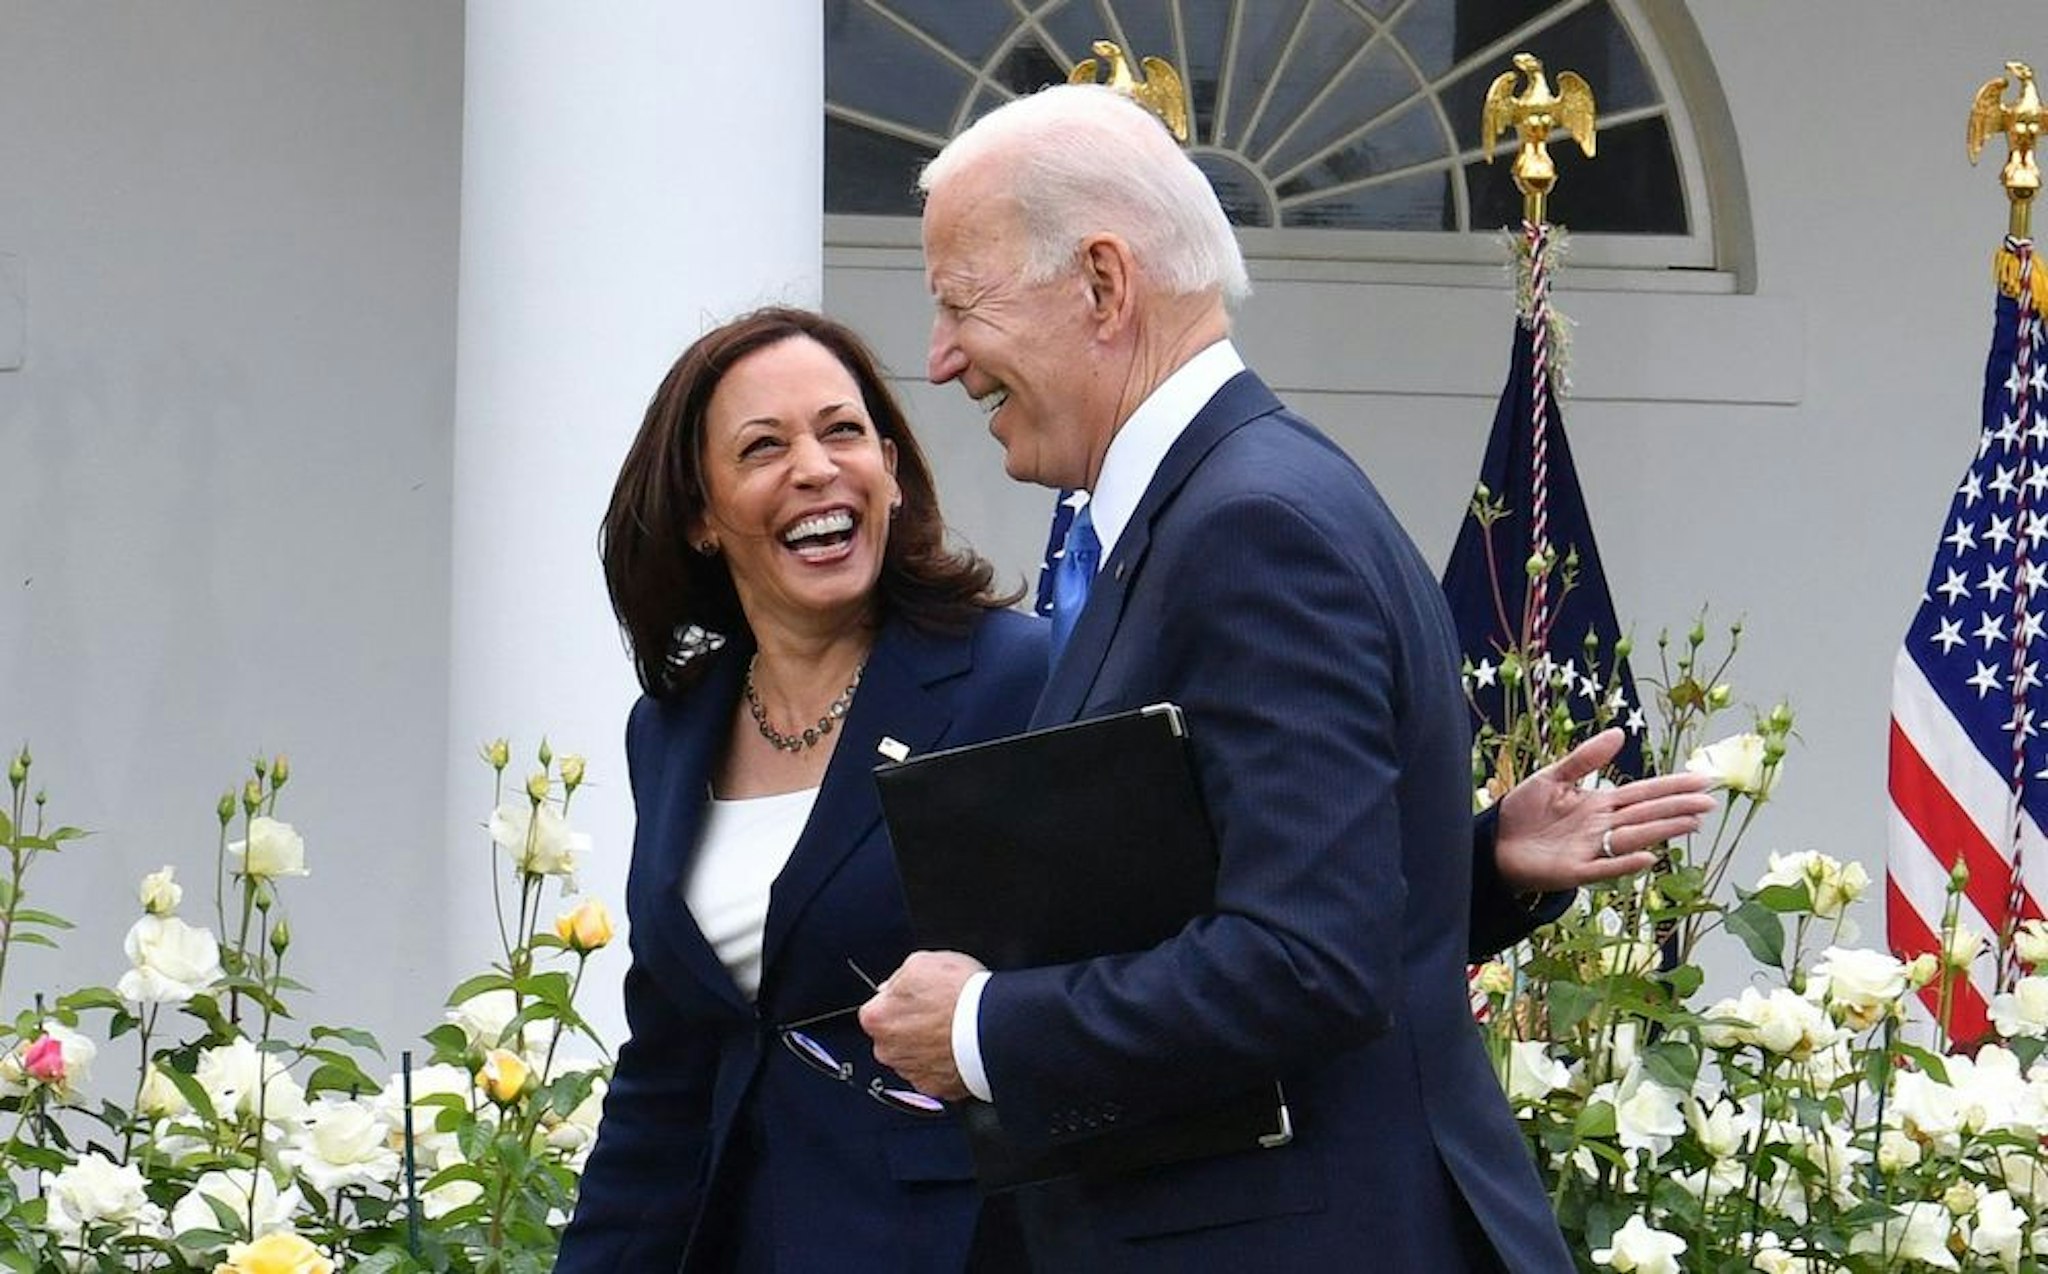 US Vice President Kamala Harris and US President Joe Biden leave after the President delivered remarks on Covid-19 response and the vaccination program, from the Rose Garden of the White House, Washington, DC on May 13, 2021. (Photo by Nicholas Kamm / AFP) (Photo by NICHOLAS KAMM/AFP via Getty Images)